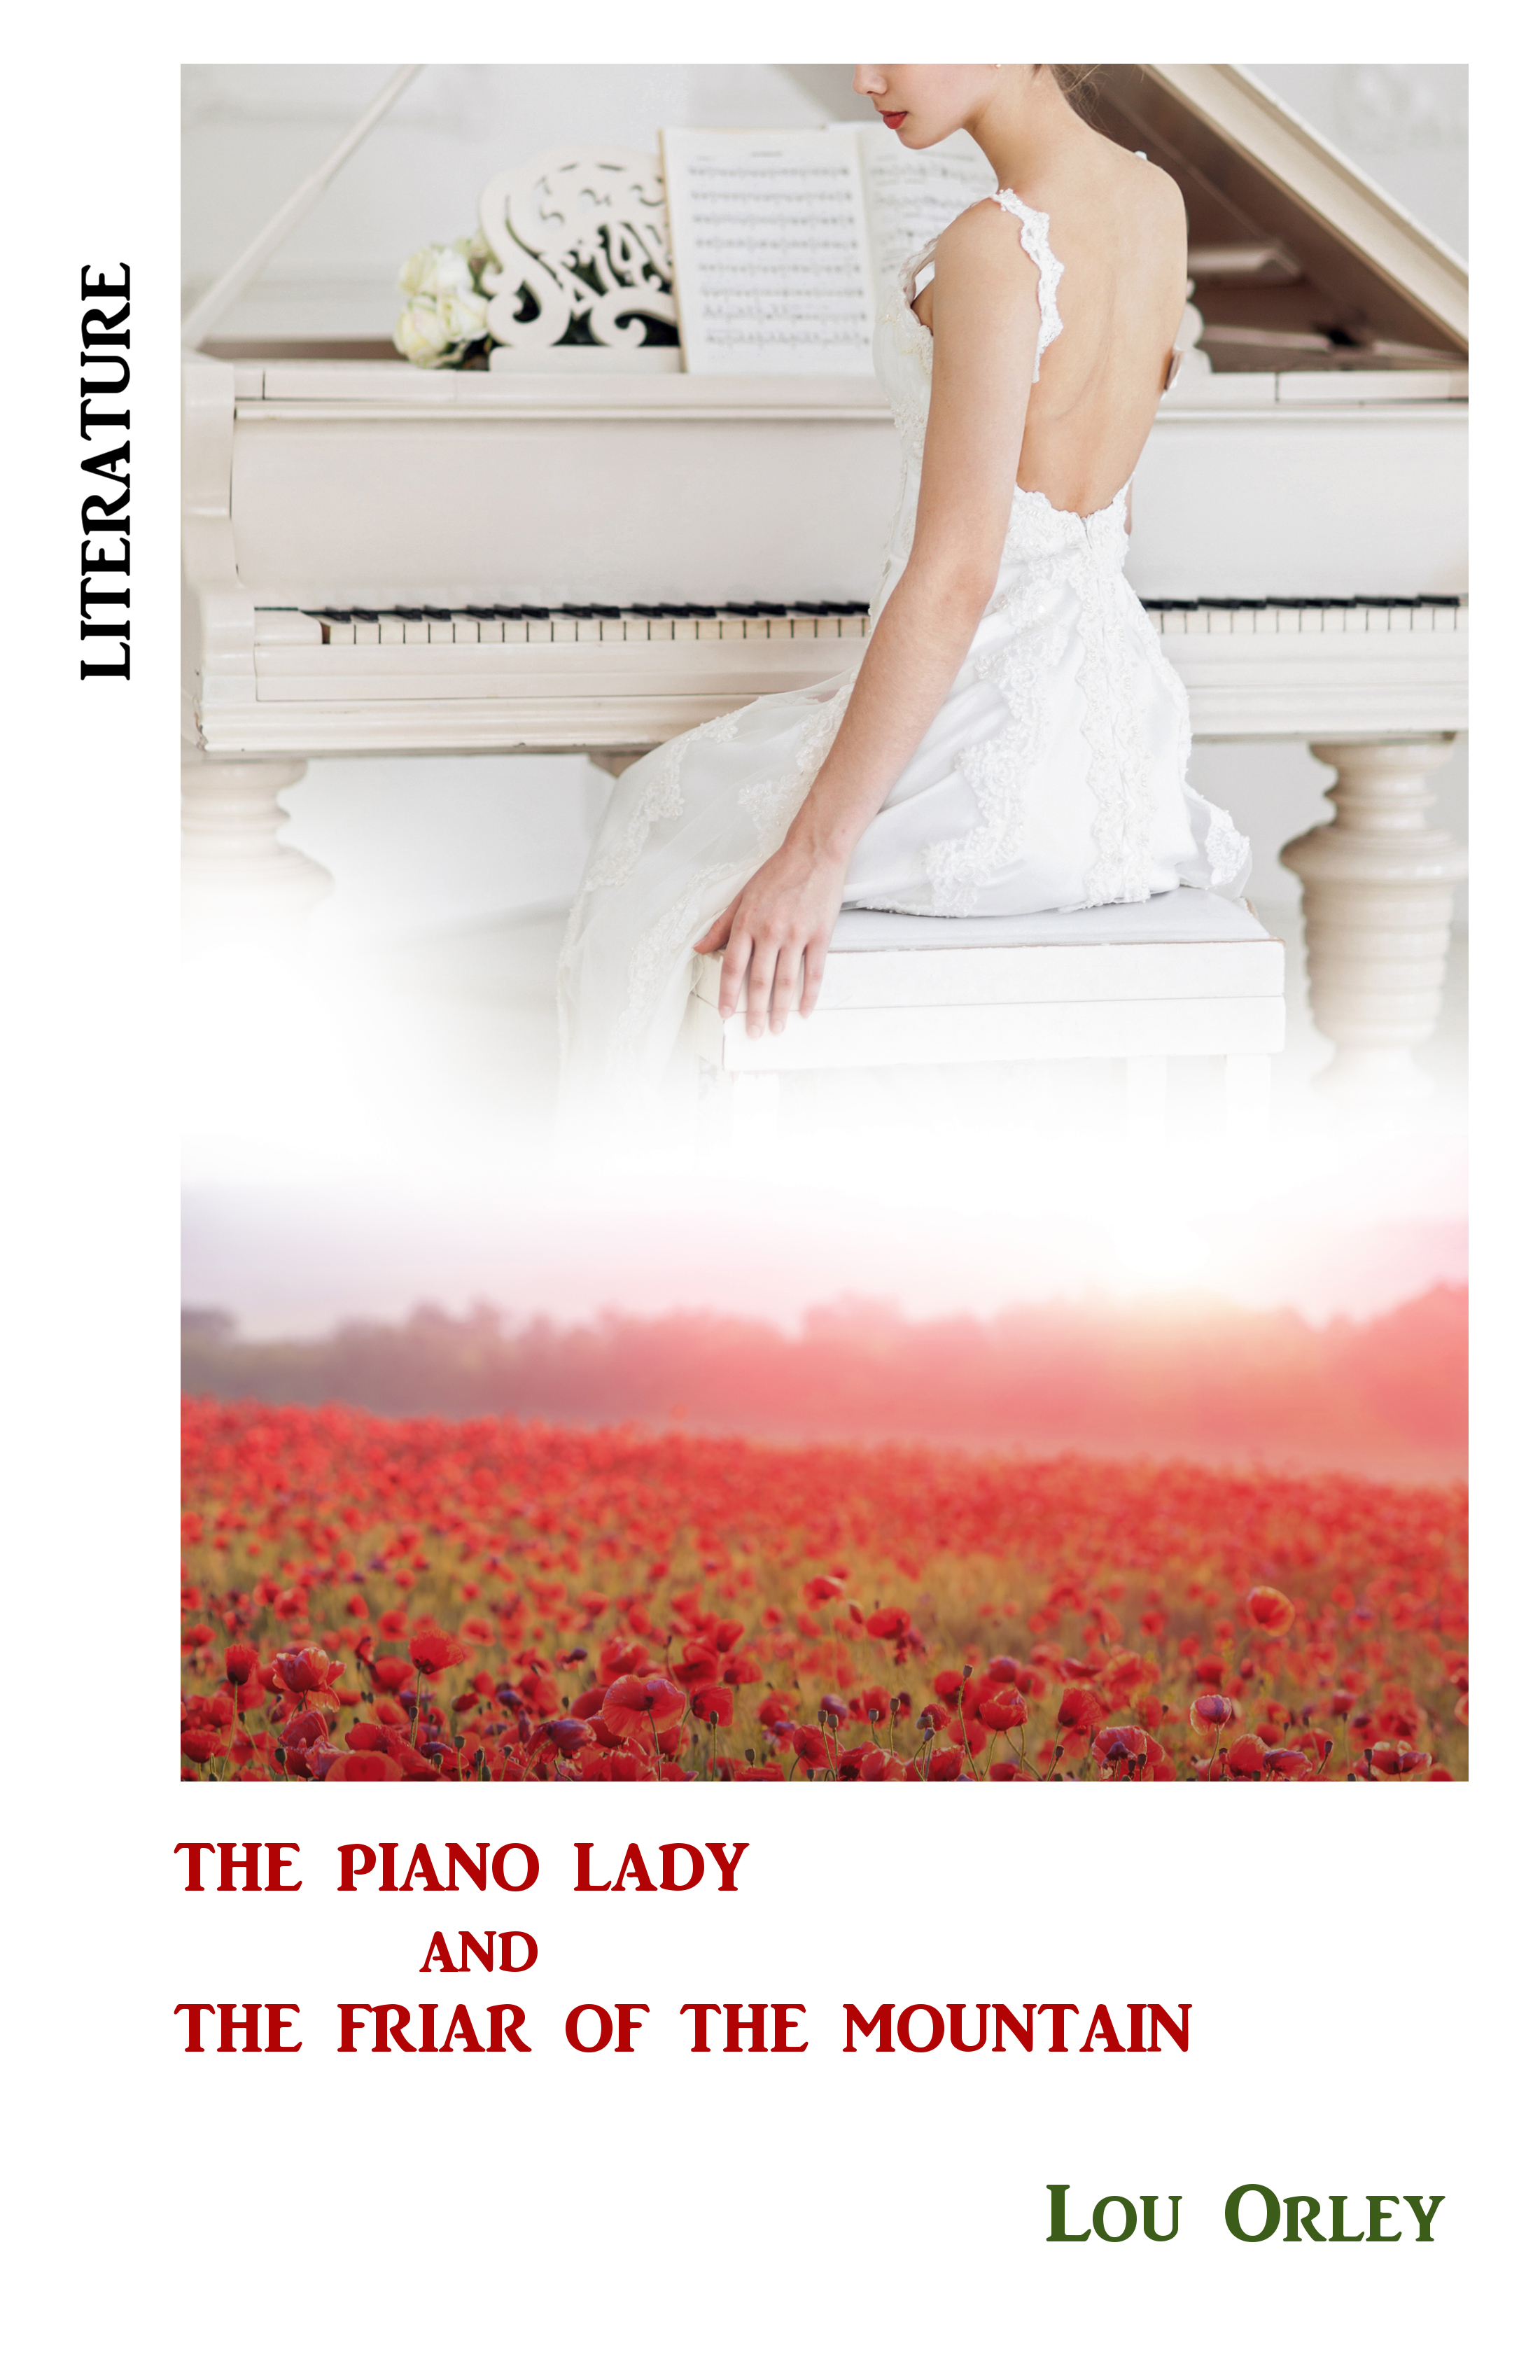 The Piano Lady and the Friar of the Mountain